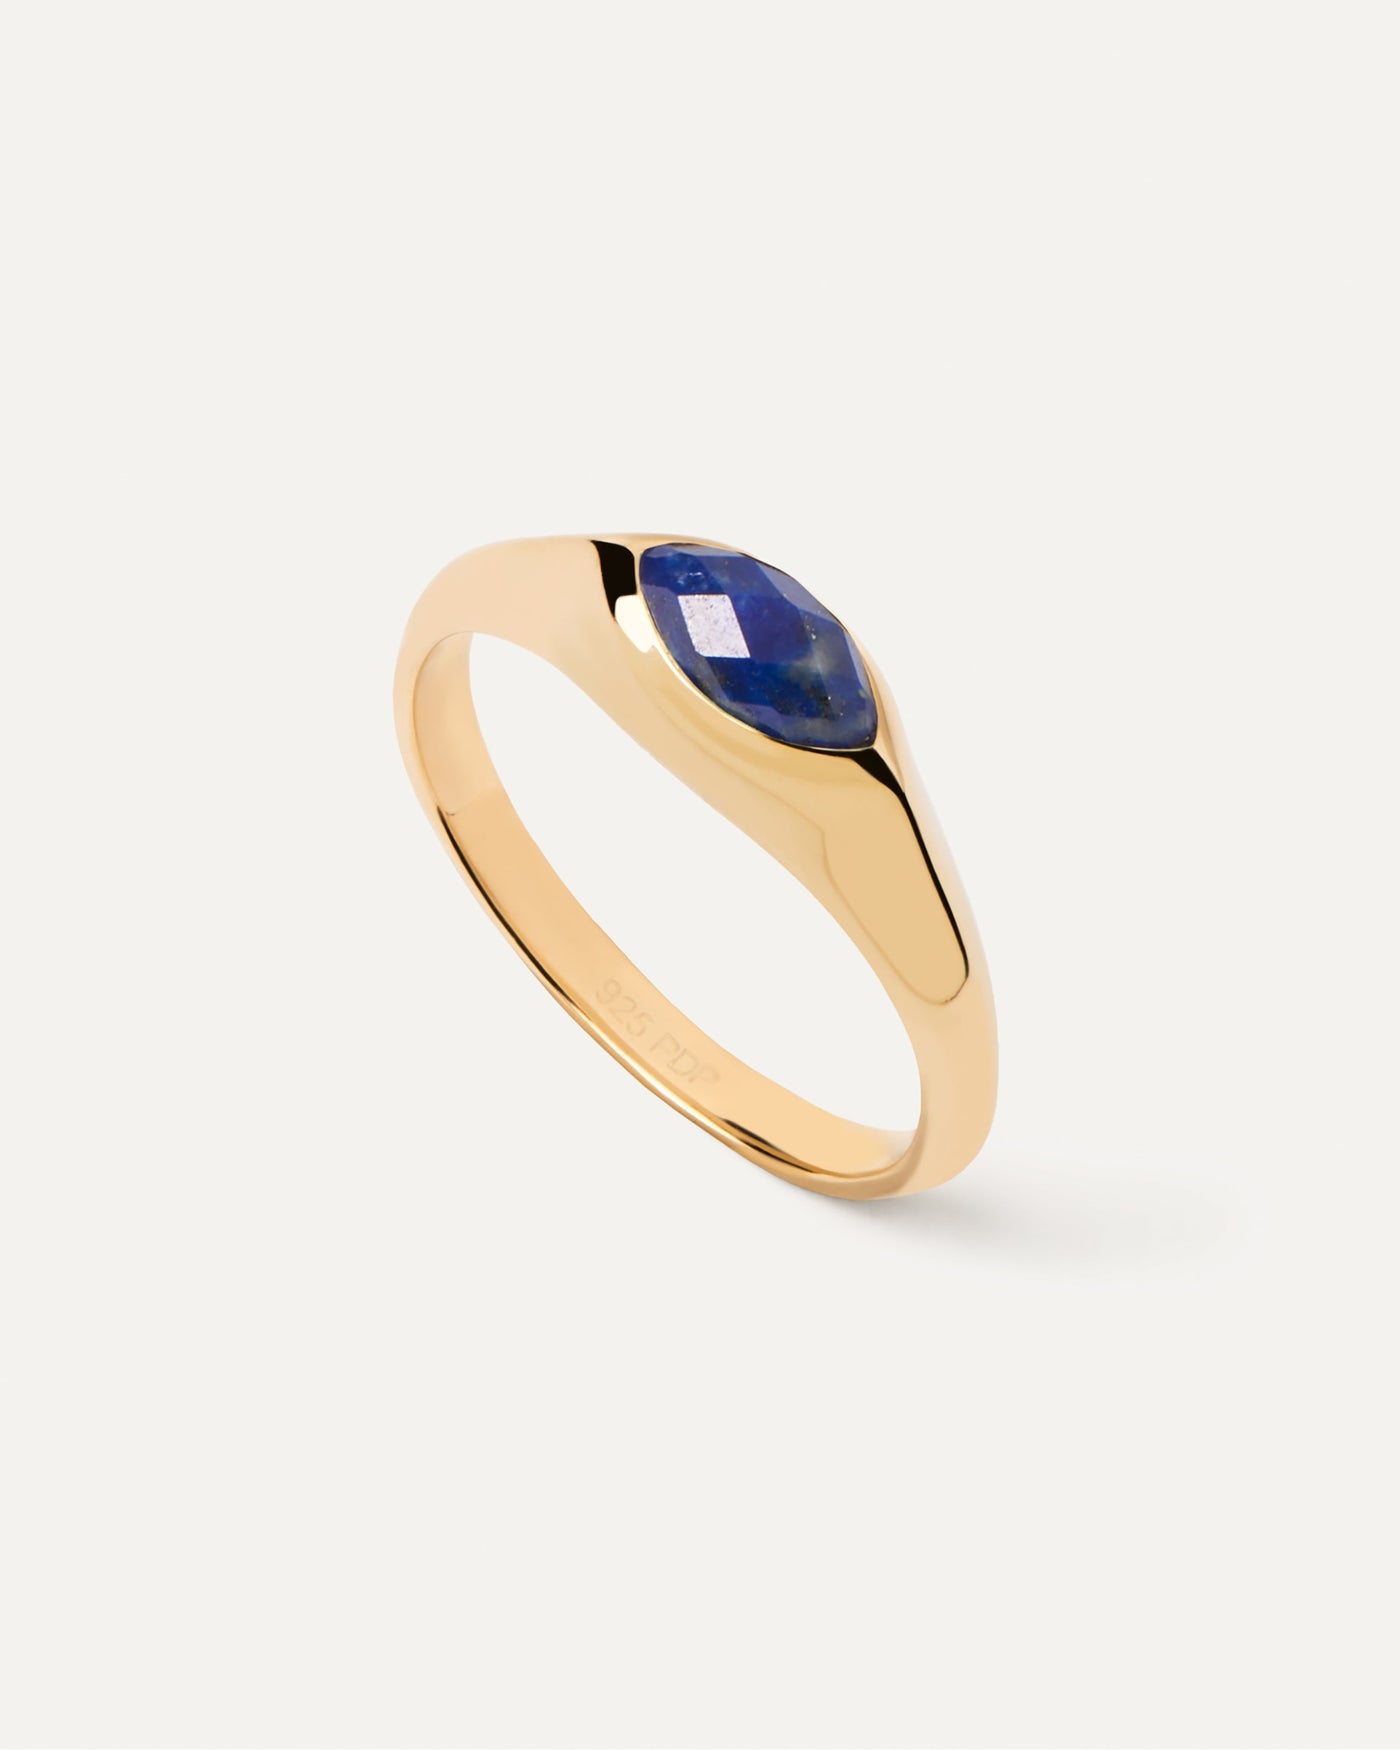 2023 Selection | Lapis Lazuli Nomad Stamp Ring. Gold-plated signet ring embellished with marquise cut blue gemstone. Get the latest arrival from PDPAOLA. Place your order safely and get this Best Seller. Free Shipping.